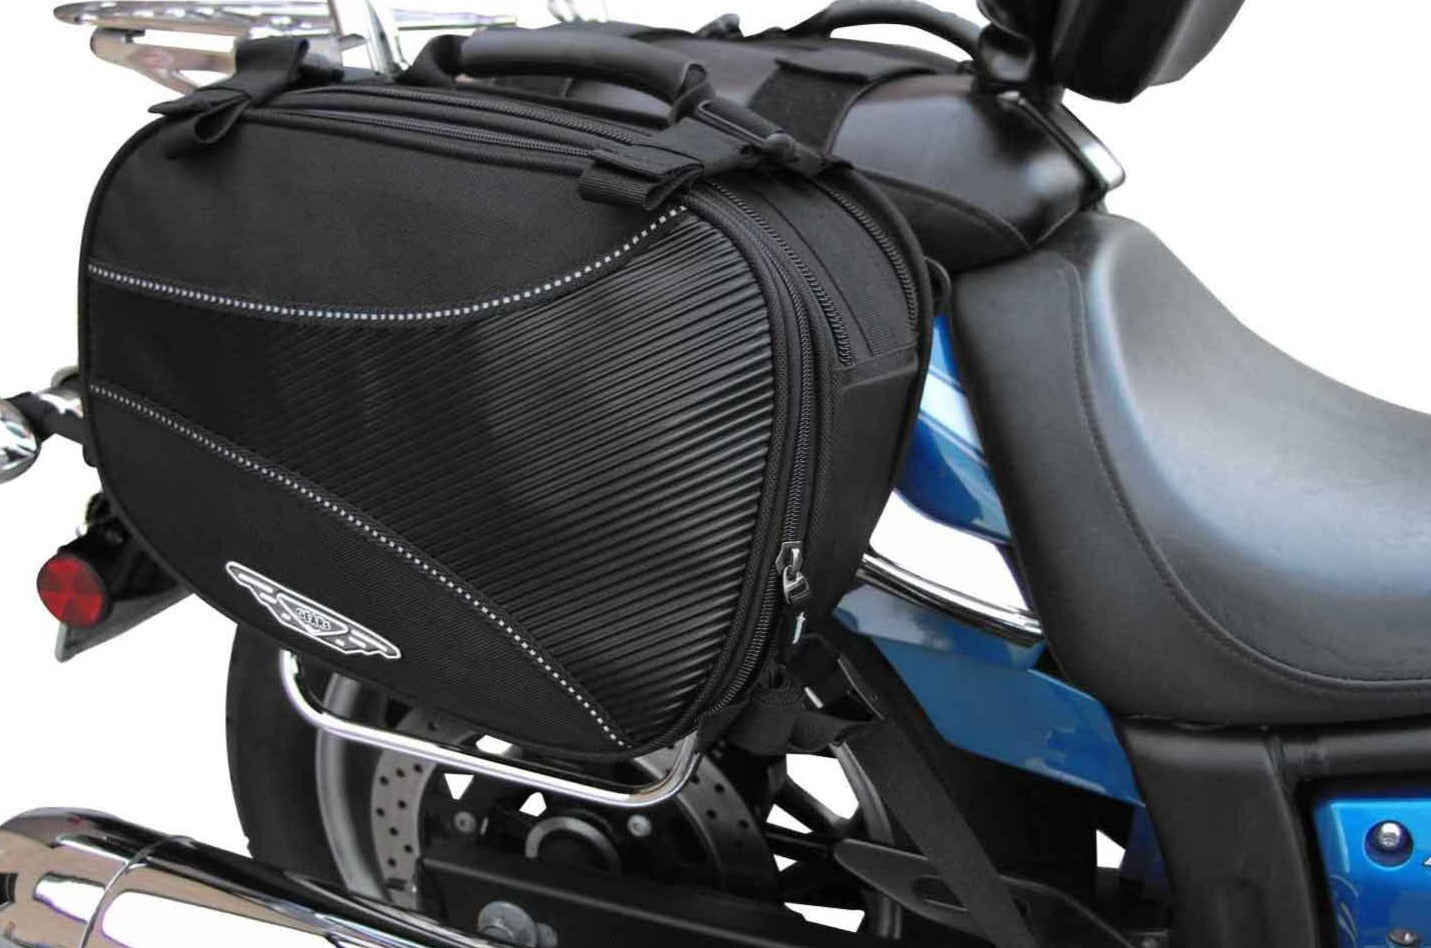 Waterproof Carbon Fiber Motorcycle Side Bag Large Capacity Luggage Bags for Travel and Riding Gorgebuy Motorcycle Saddlebags Multi-Function Motorcycle Panniers Saddle Bags